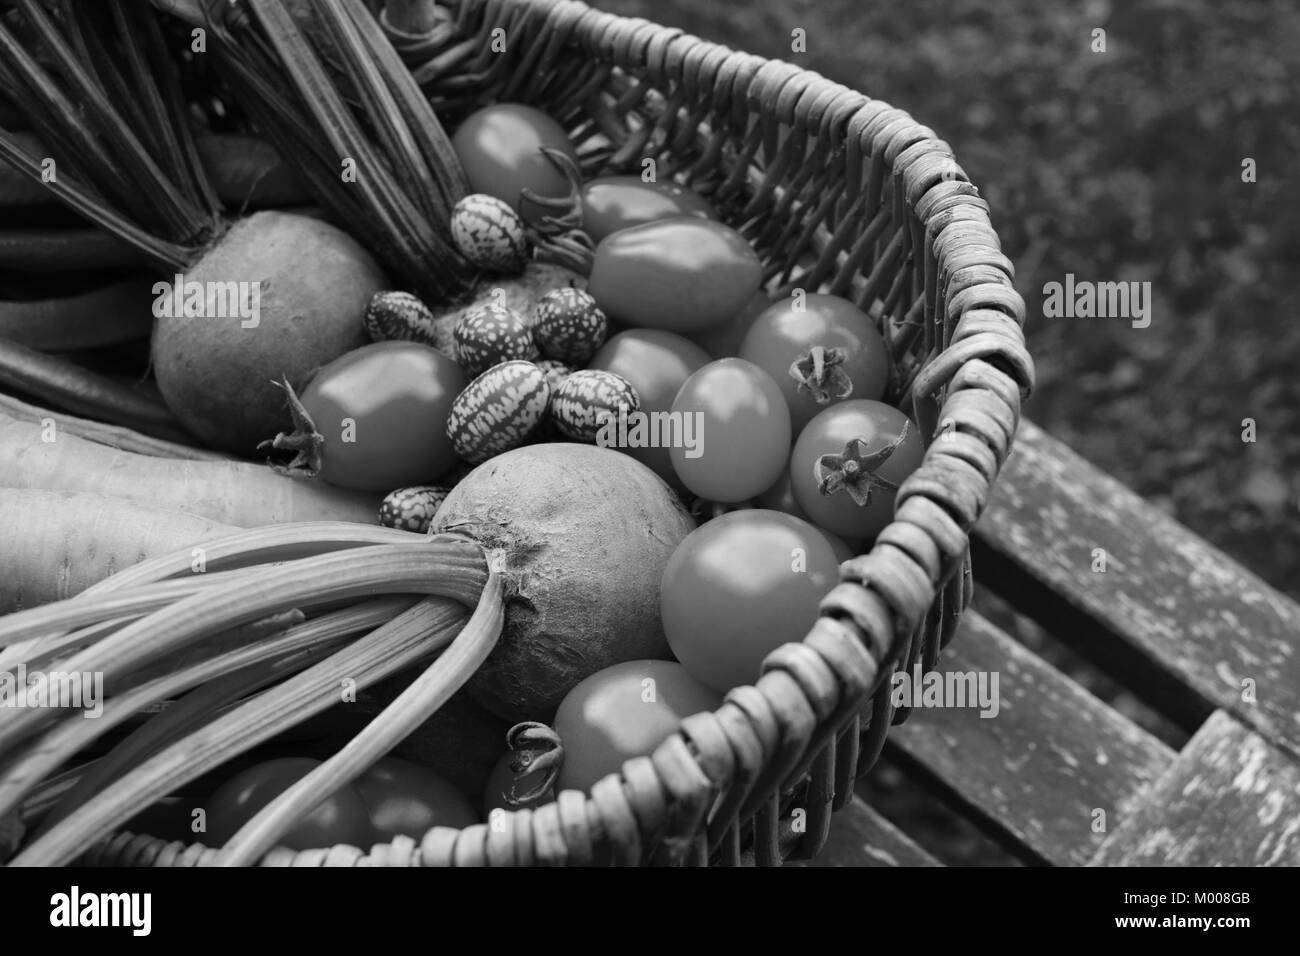 Close-up of beetroot and tomatoes with cucamelons and carrots in a wicker basket on a rustic garden bench - monochrome processing Stock Photo